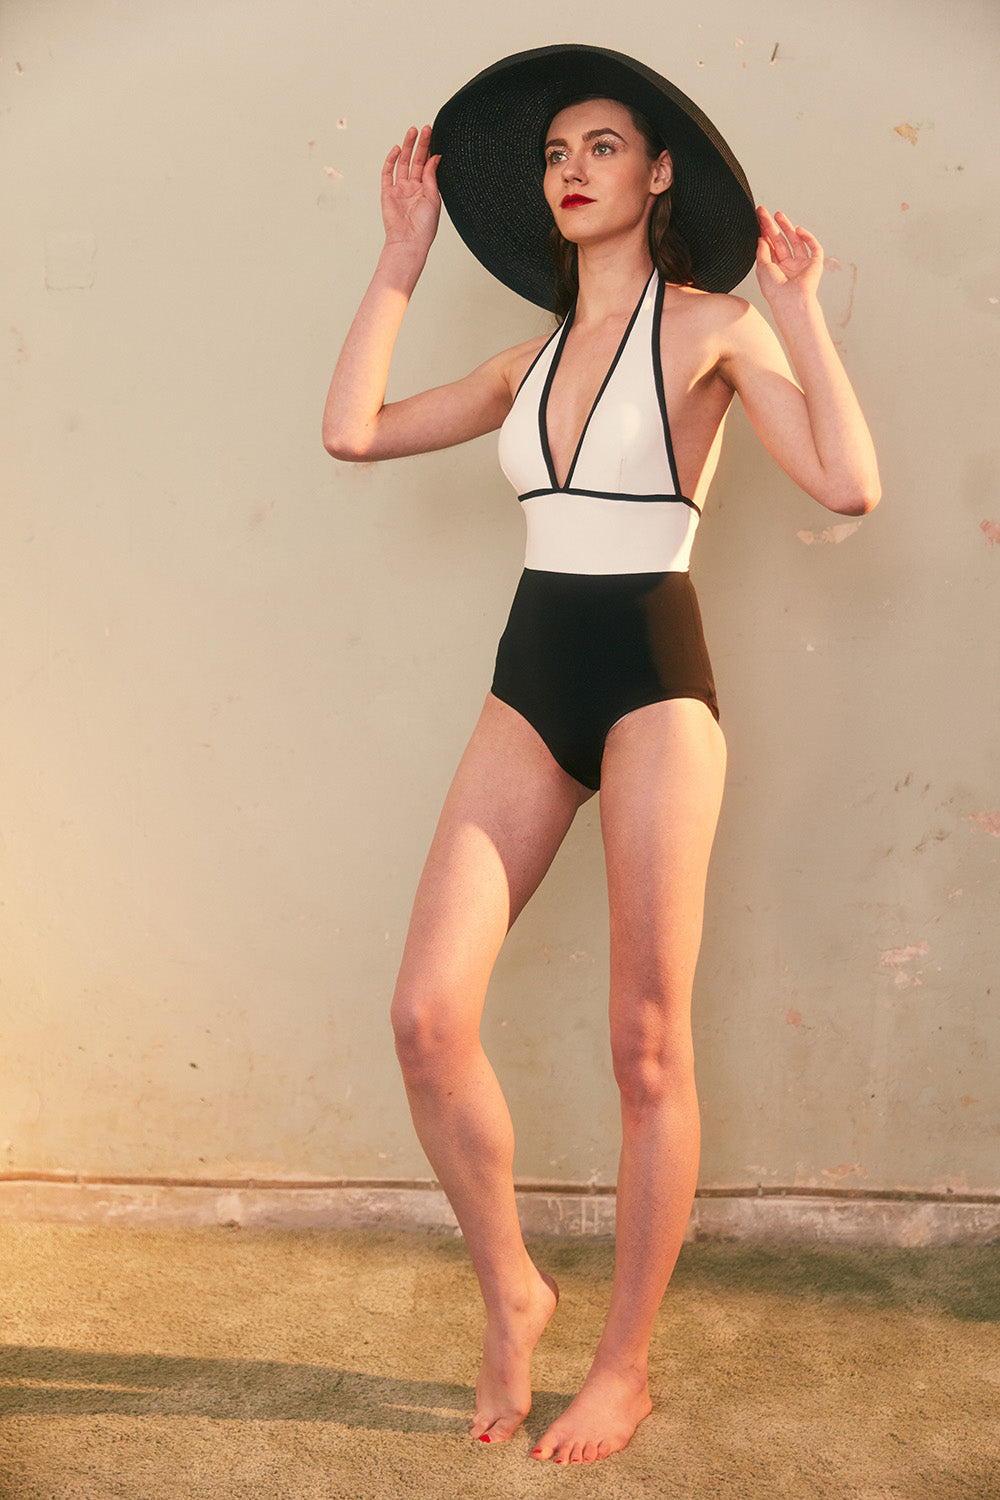 Black-And-White High-Waist Swimsuit